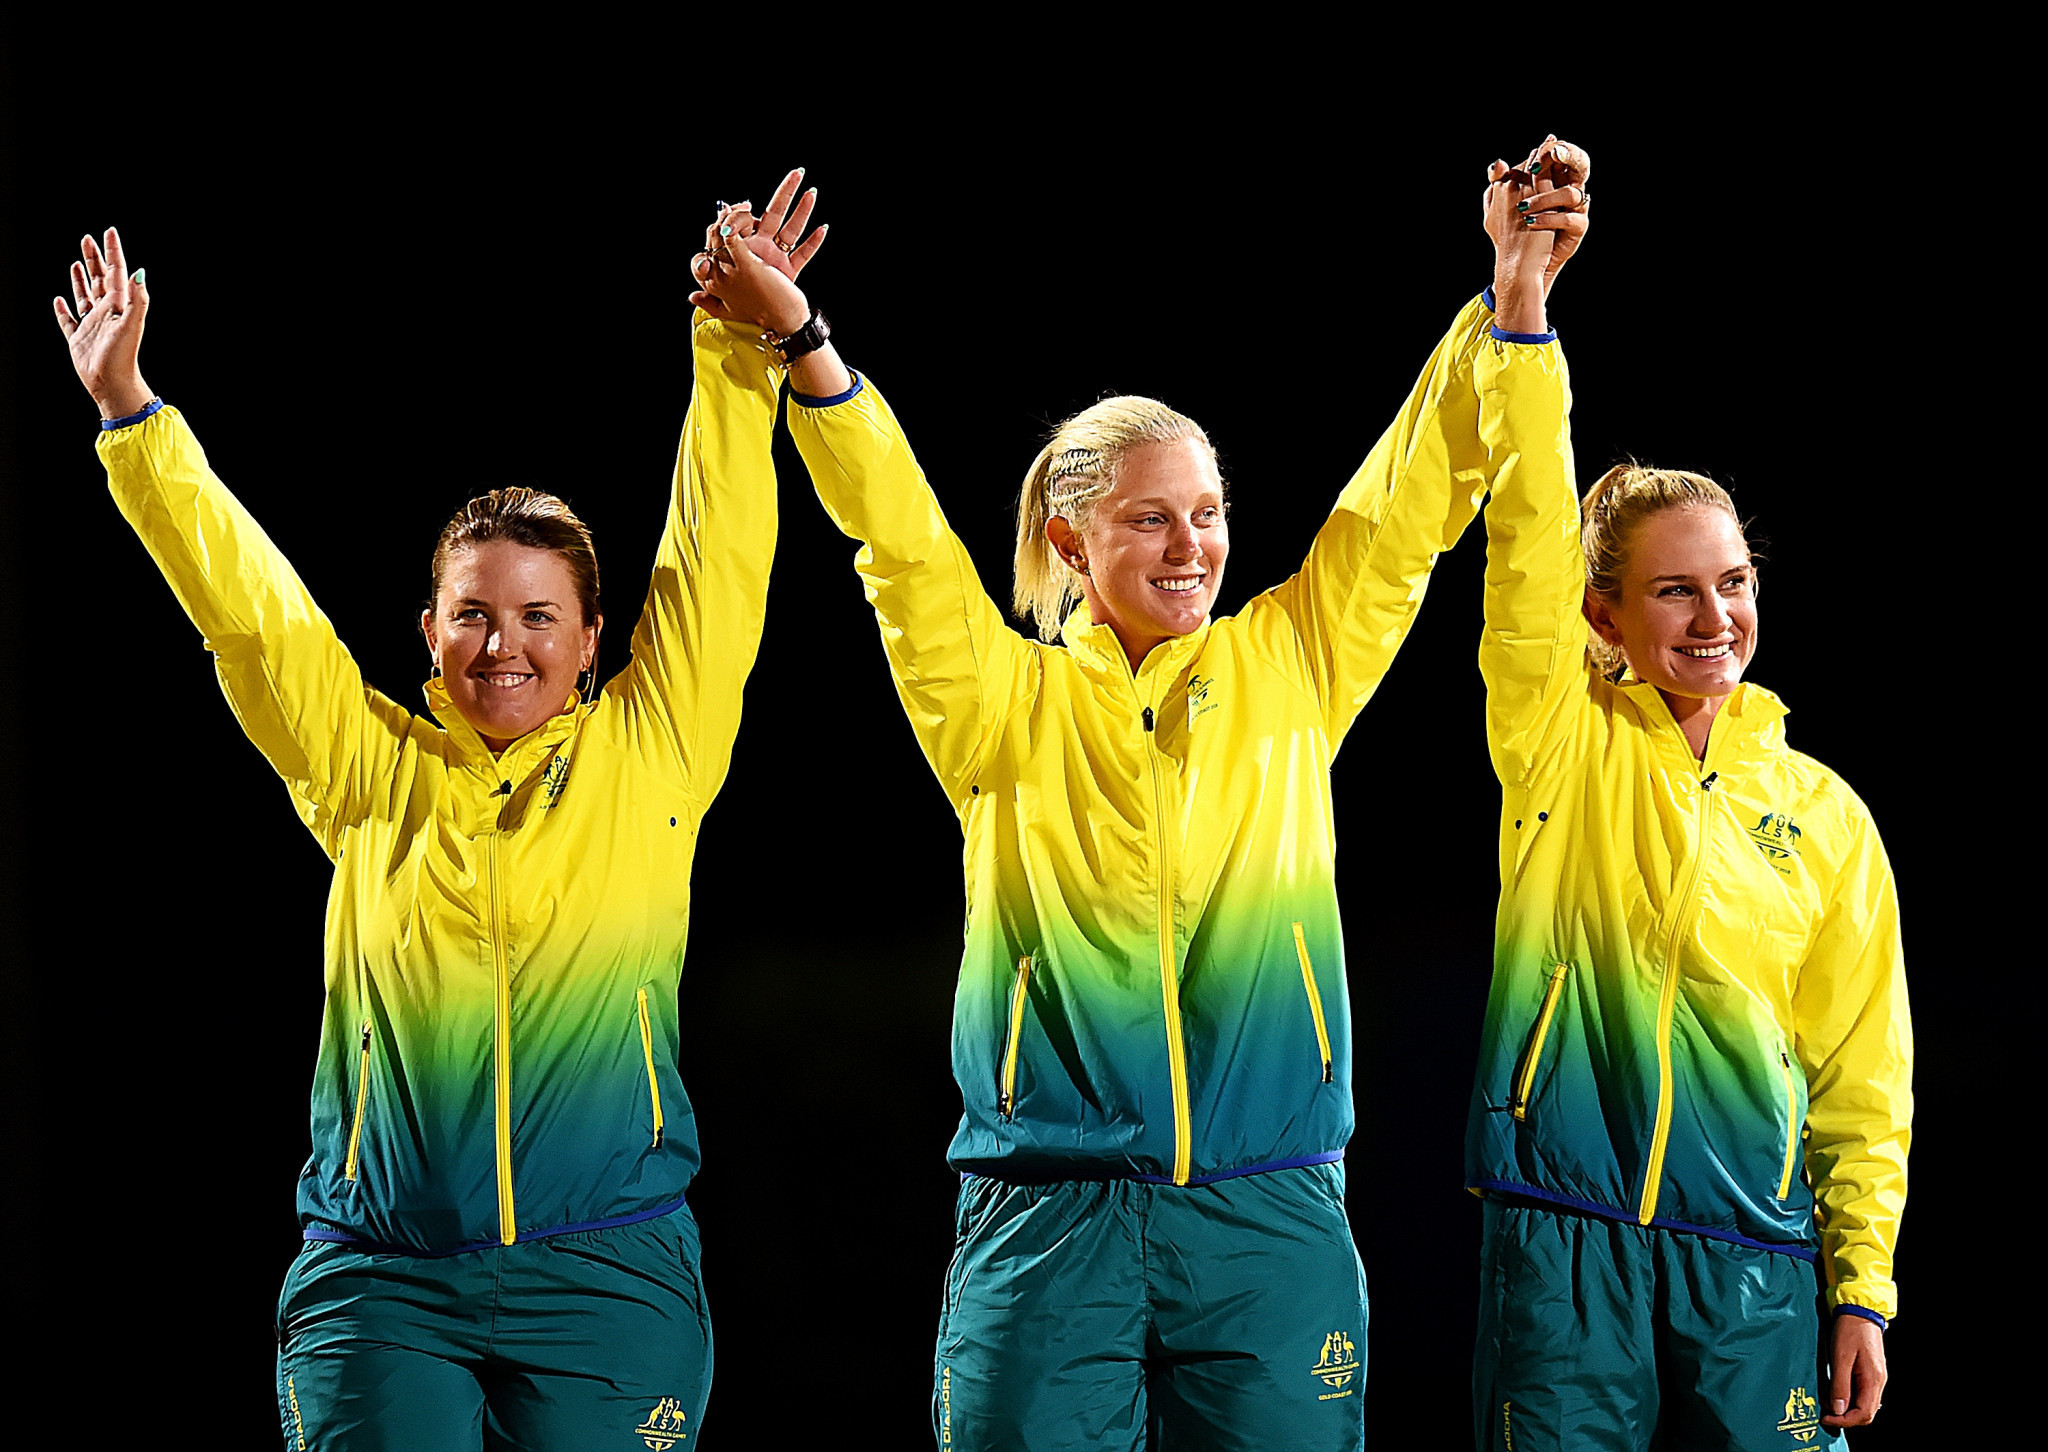 Commonwealth Games Australia to provide $13 million funding for athletes in preparation for Birmingham 2022